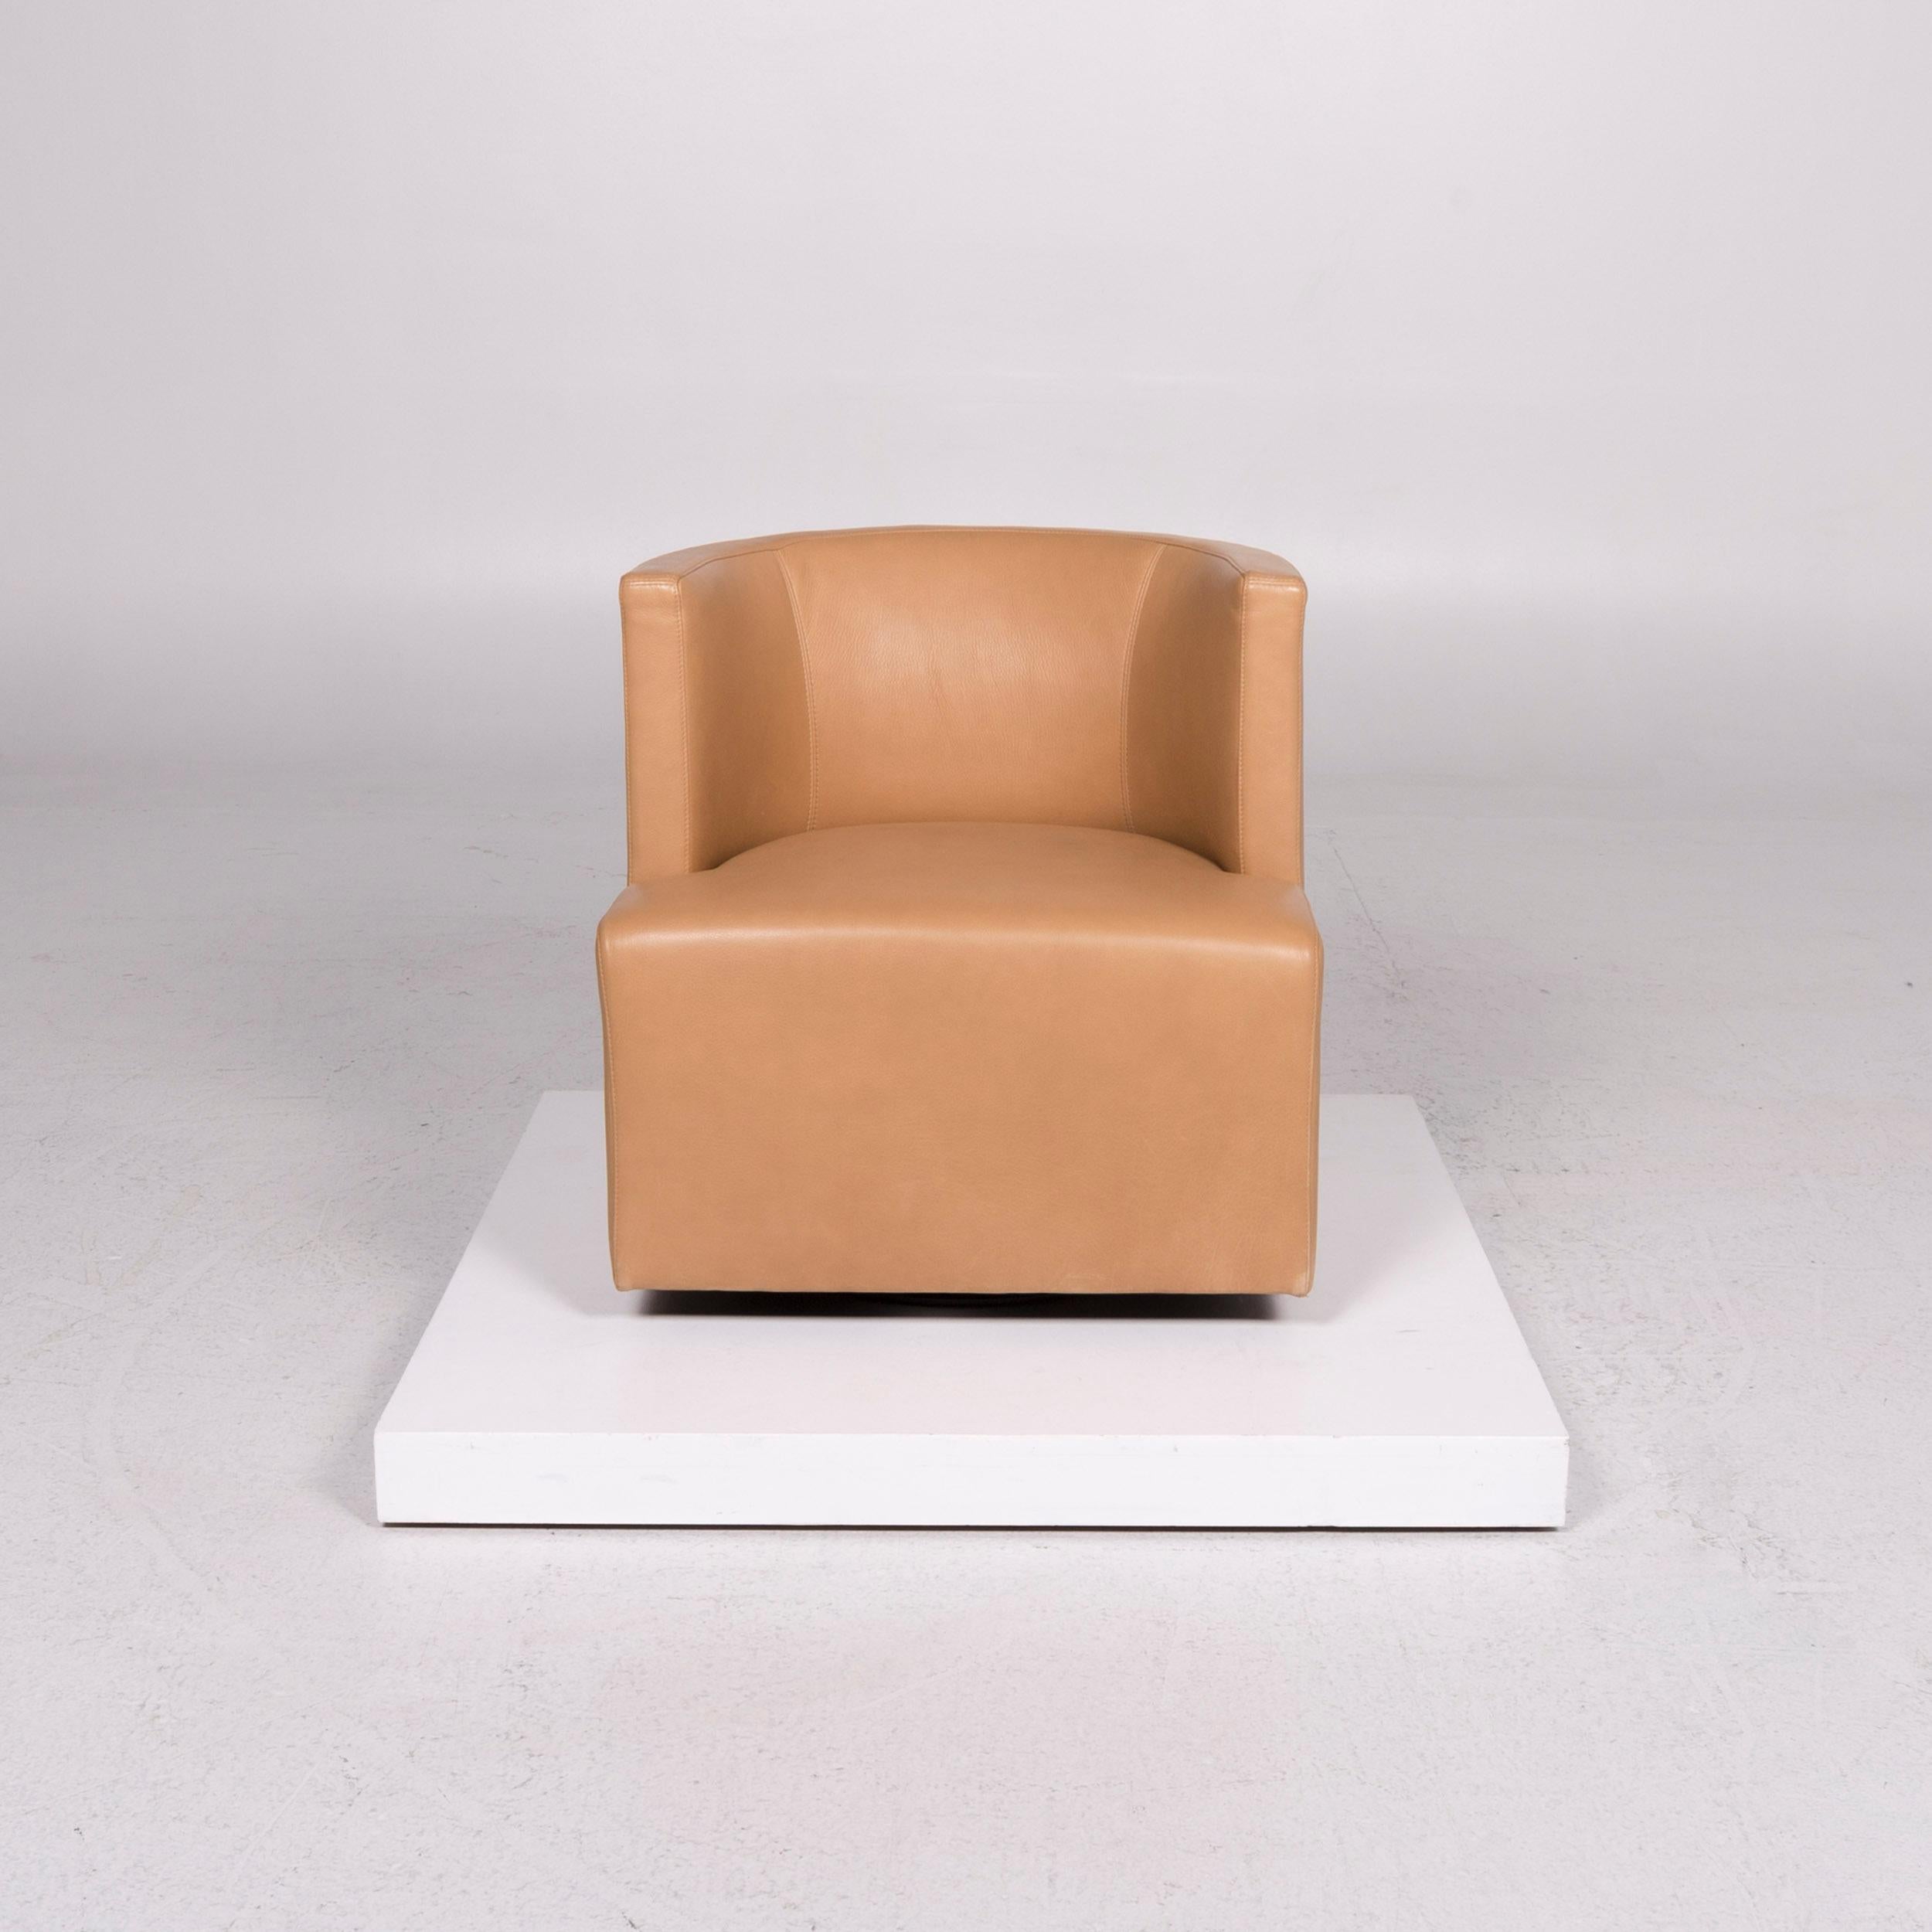 We bring to you a Wittmann leather armchair beige.

 Product Measurements in centimeters:
 

 Depth 65
Width 65
Height 66
Seat-height 42
Rest-height 66
Seat-depth 50
Seat-width 65
Back-height 25.

  